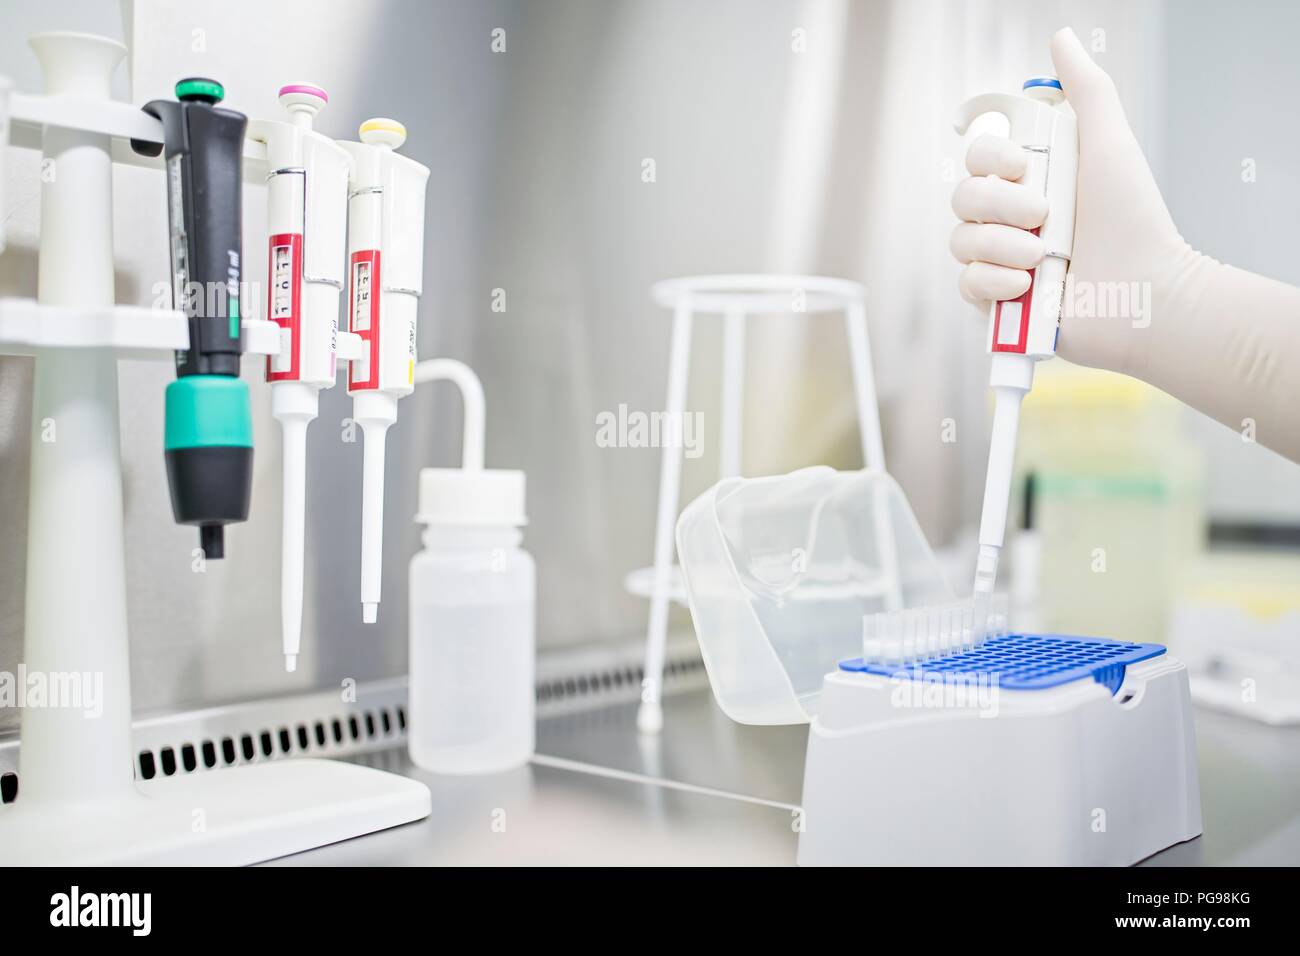 Technician pipetting biological samples in a laminar flow hood. Stock Photo